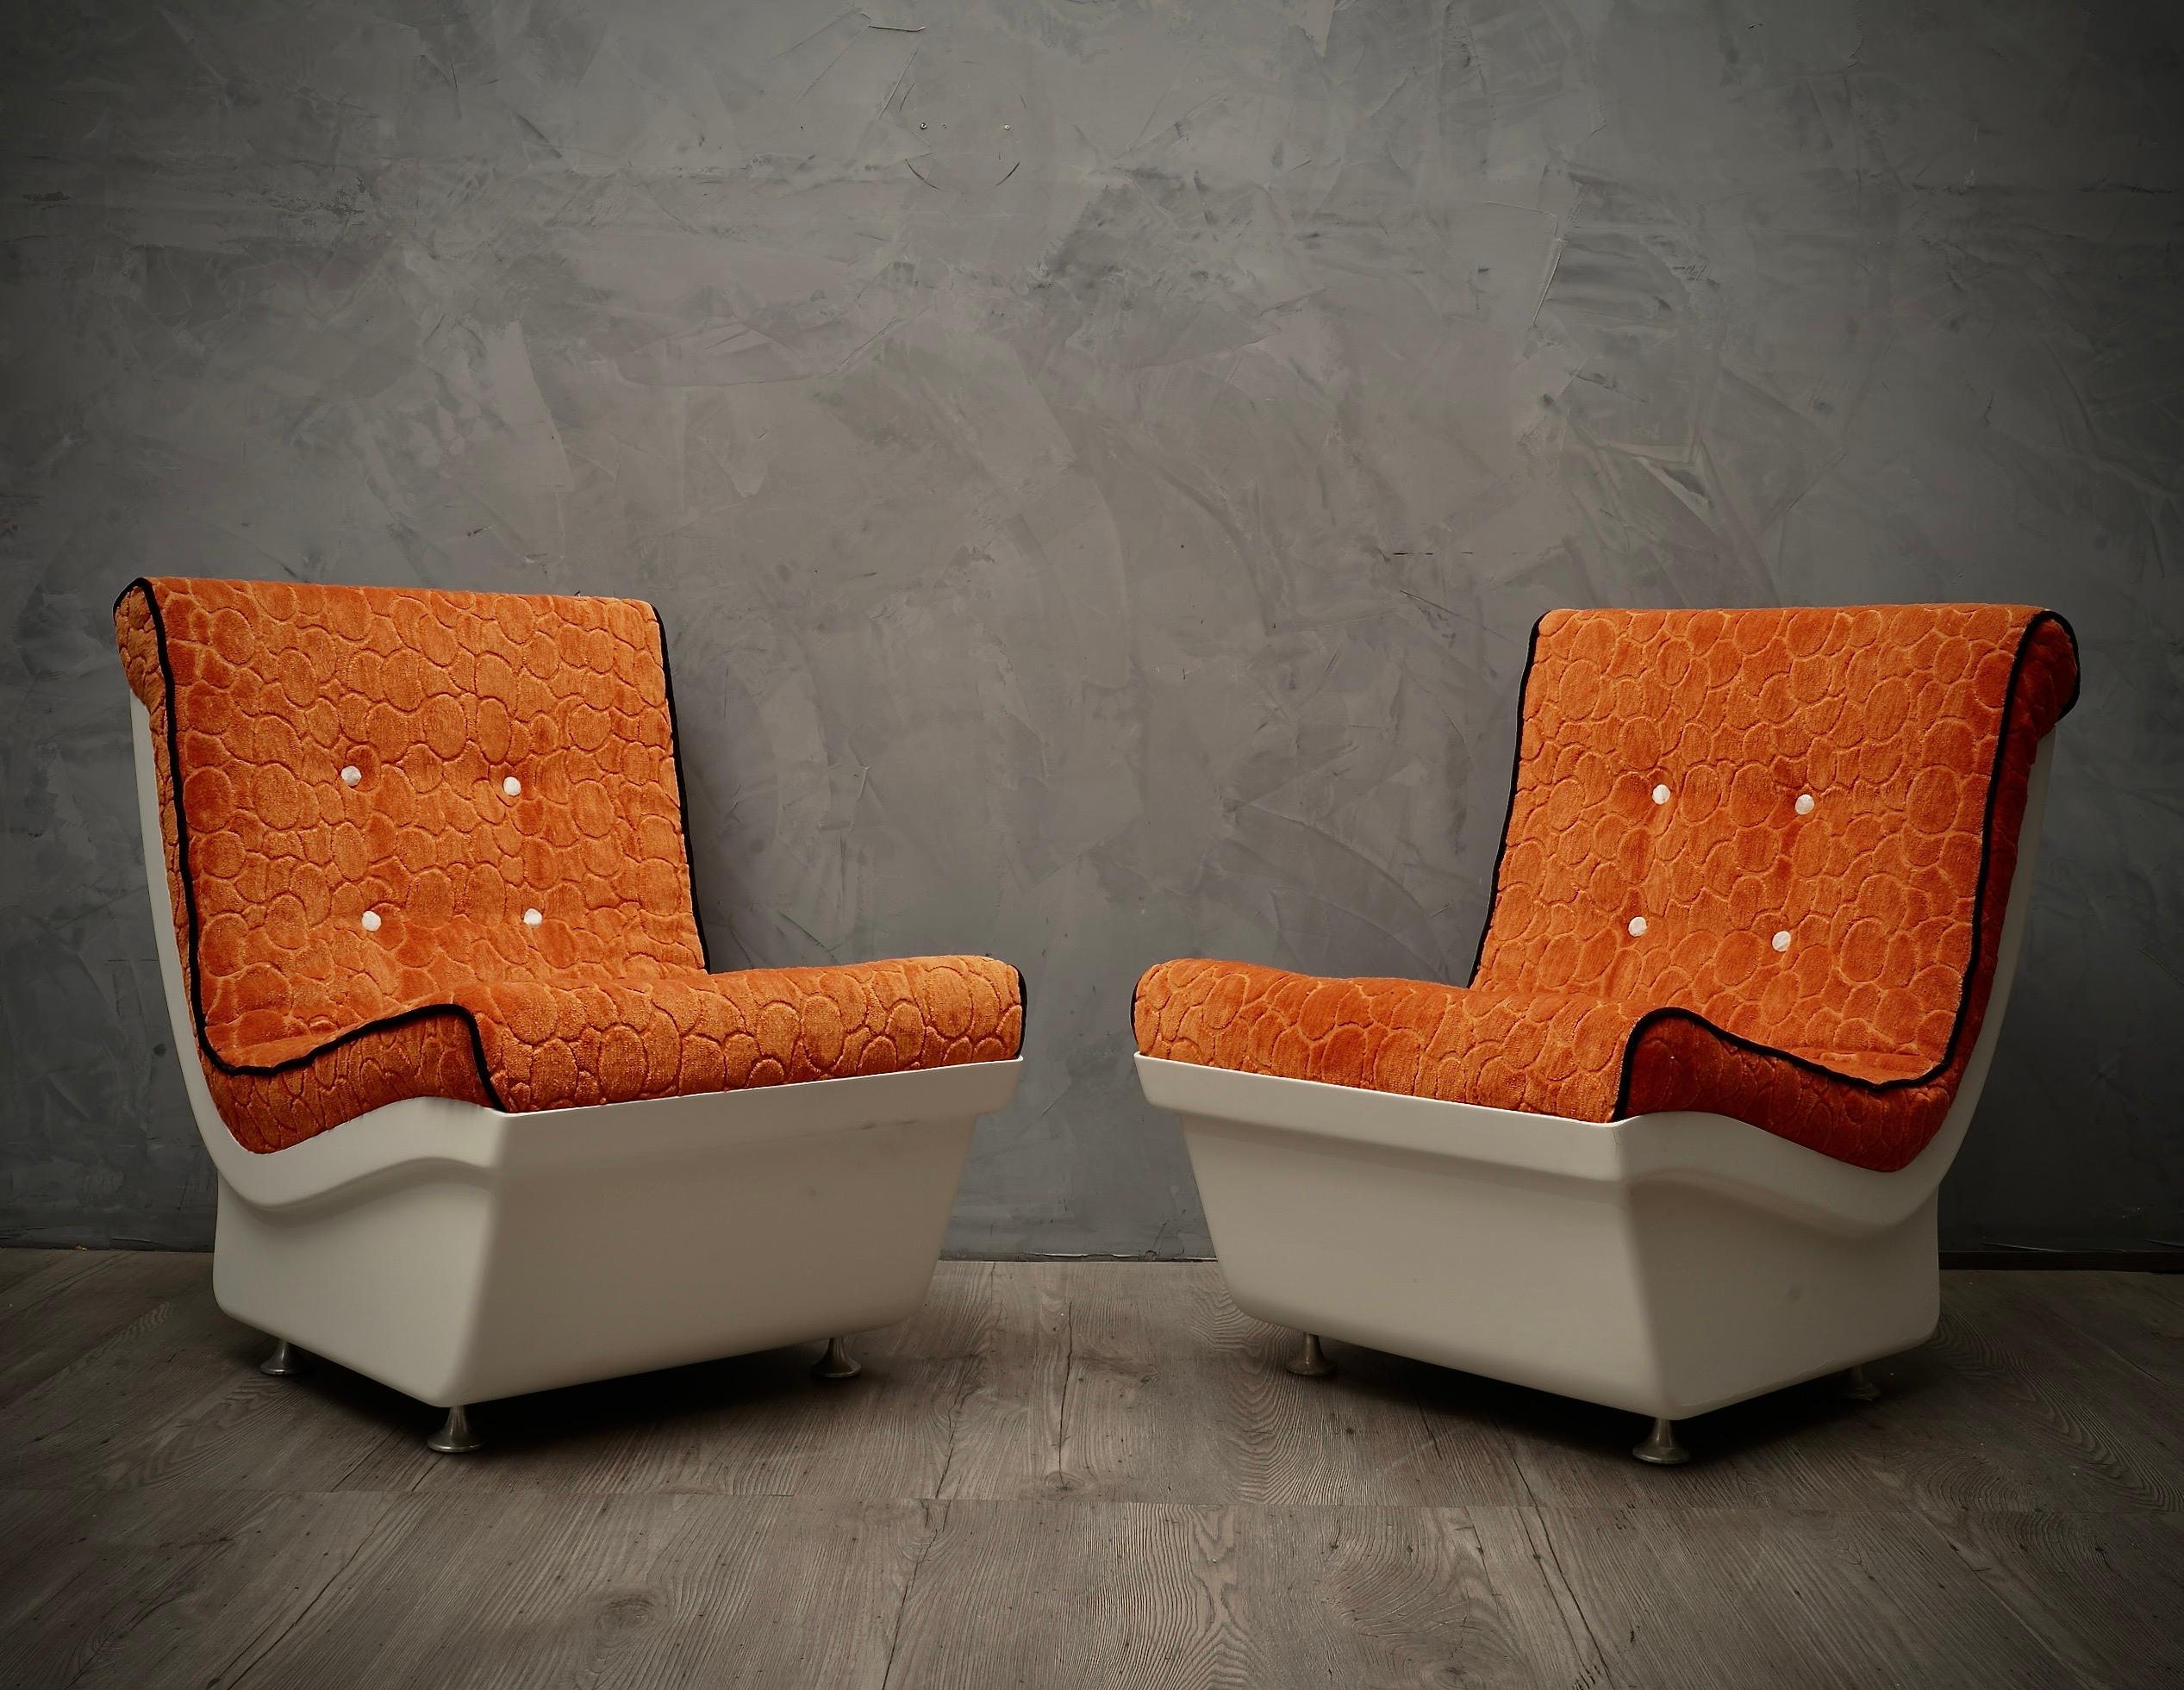 Midcentury design for an armchair out of the ordinary, dressed in a bright and exhilarating Orange velvet. Crazy about the orange color of this beautiful velvet fabric. Strong contrast between the strong white of the resin and the orange of the